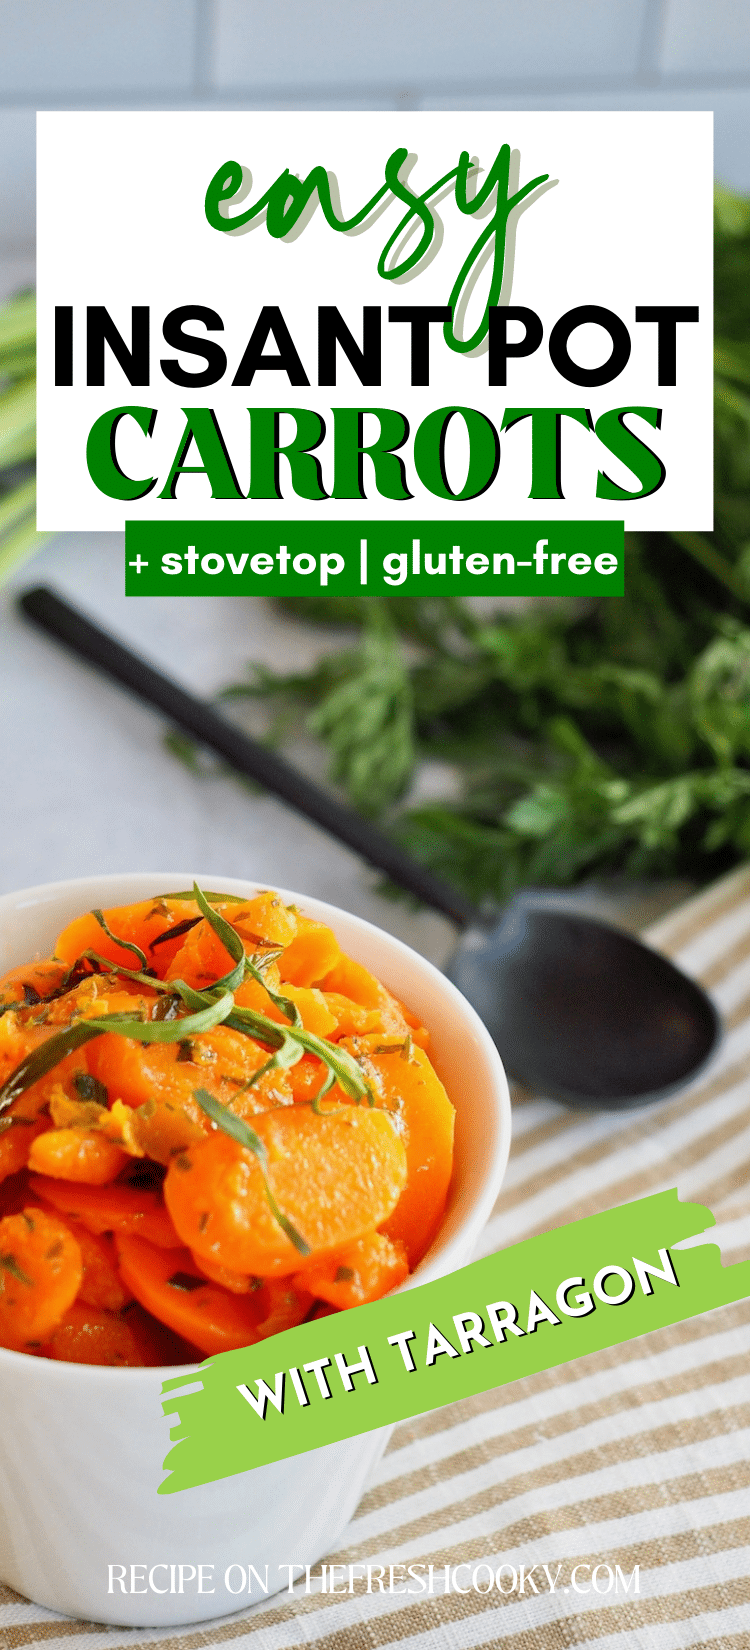 Long pin for instant pot carrots with image of carrots in bowl with fresh carrots behind.